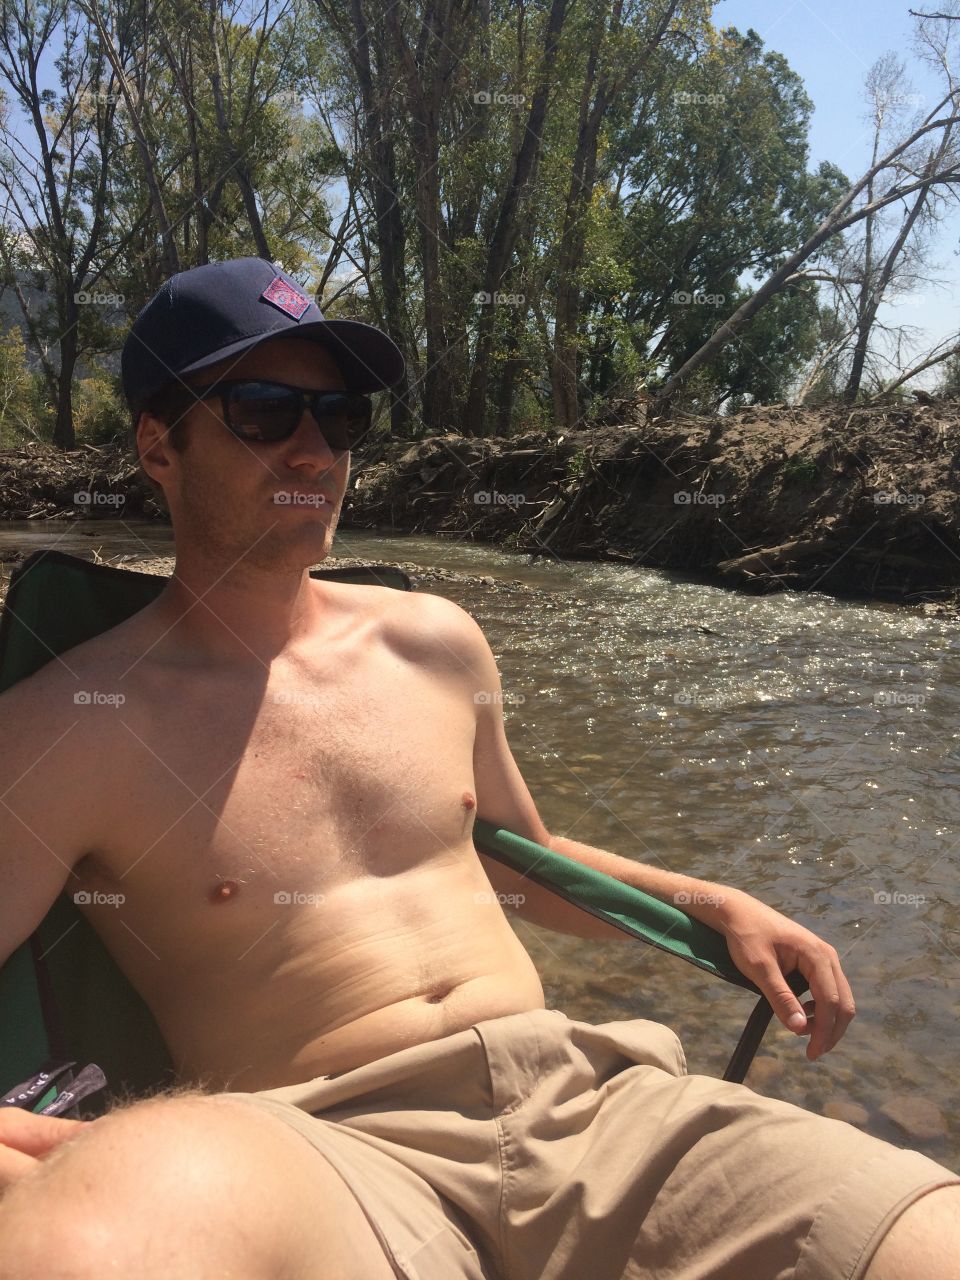 Relaxing on the river